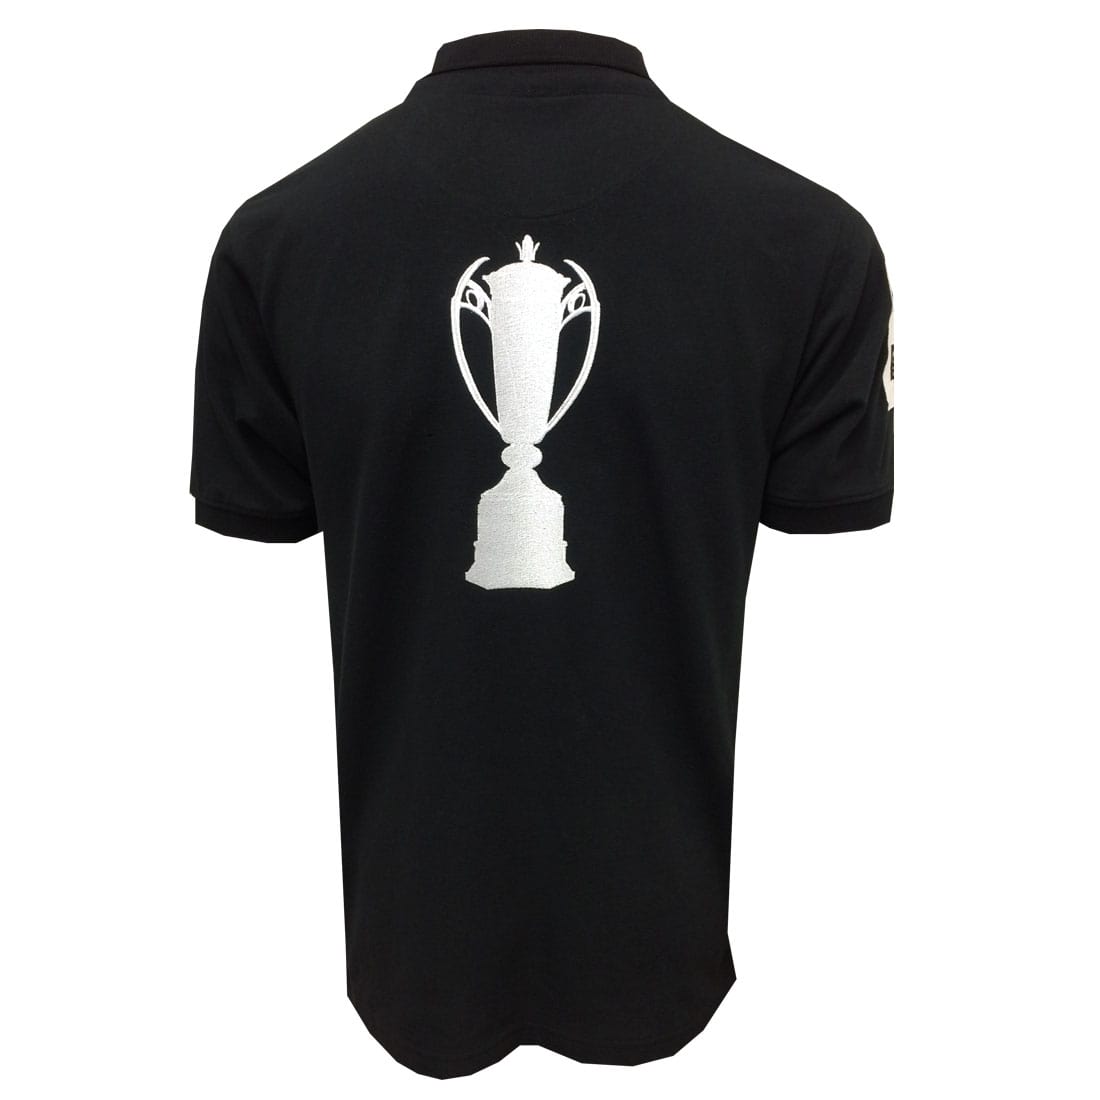 Guinness Six Nations Black Polo Shirt with a large white Six Nations trophy graphic on the back.